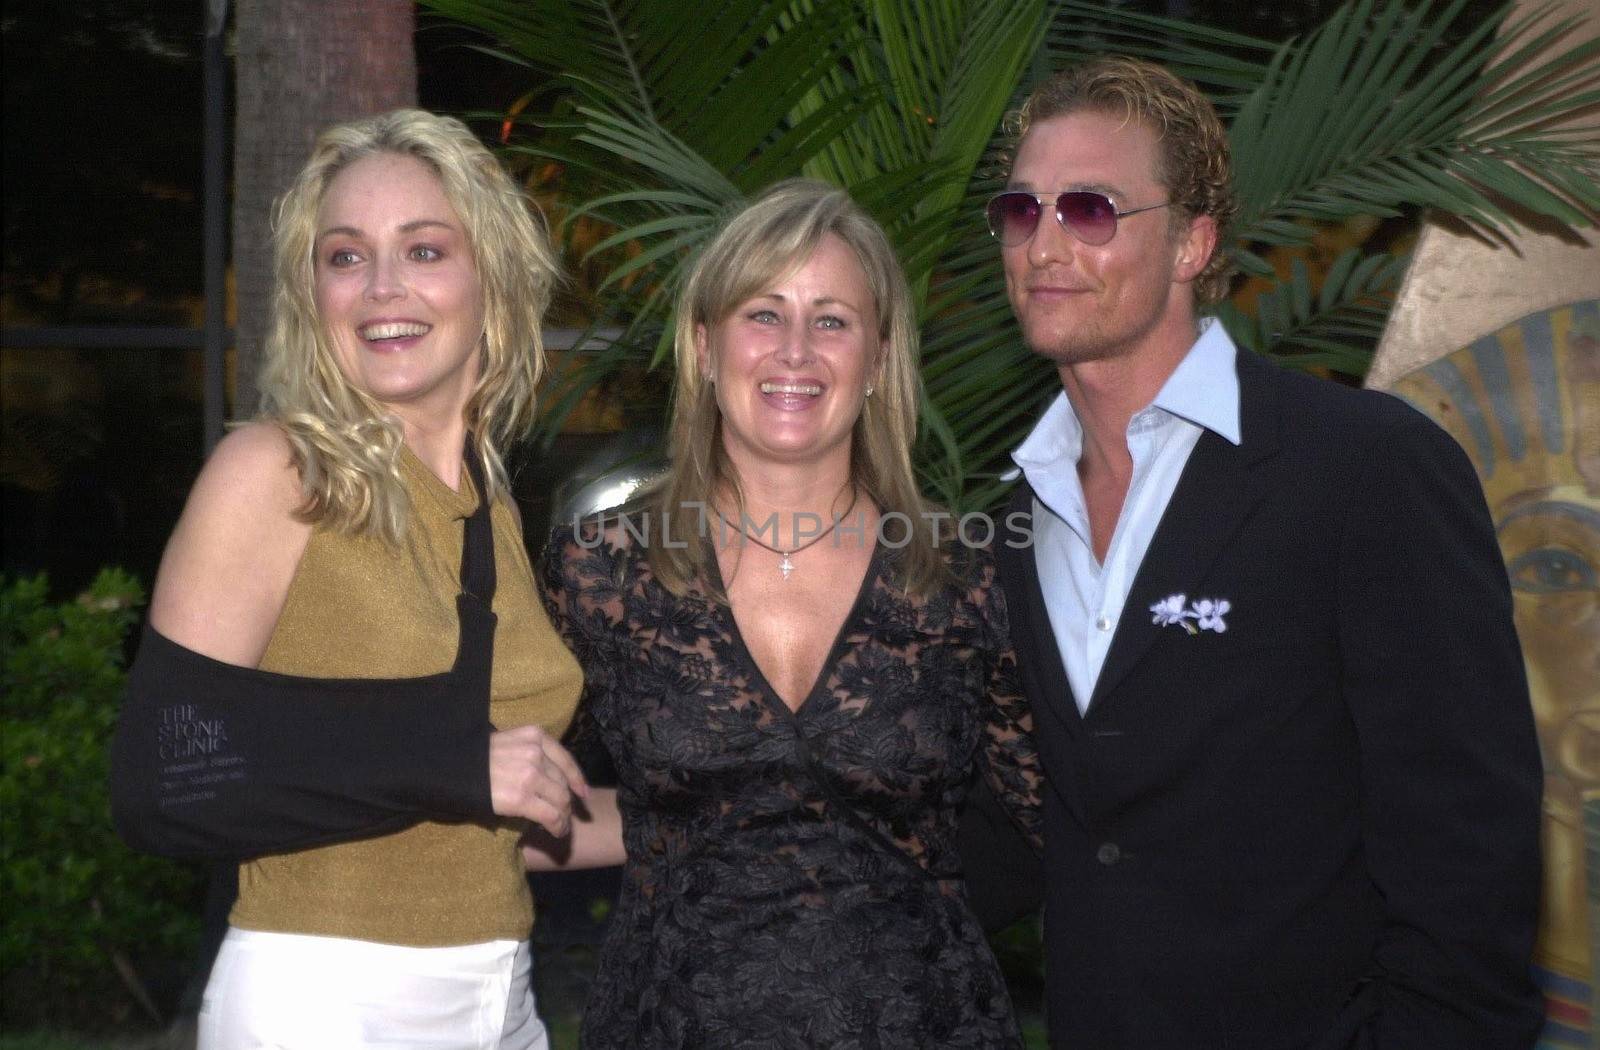 Sharon Stone, Kelly Stone and Matthew McConaughey at the Planet Hope Gala hosted by Sharon and Kelly Stone in Woodland Hills. 08-07-00